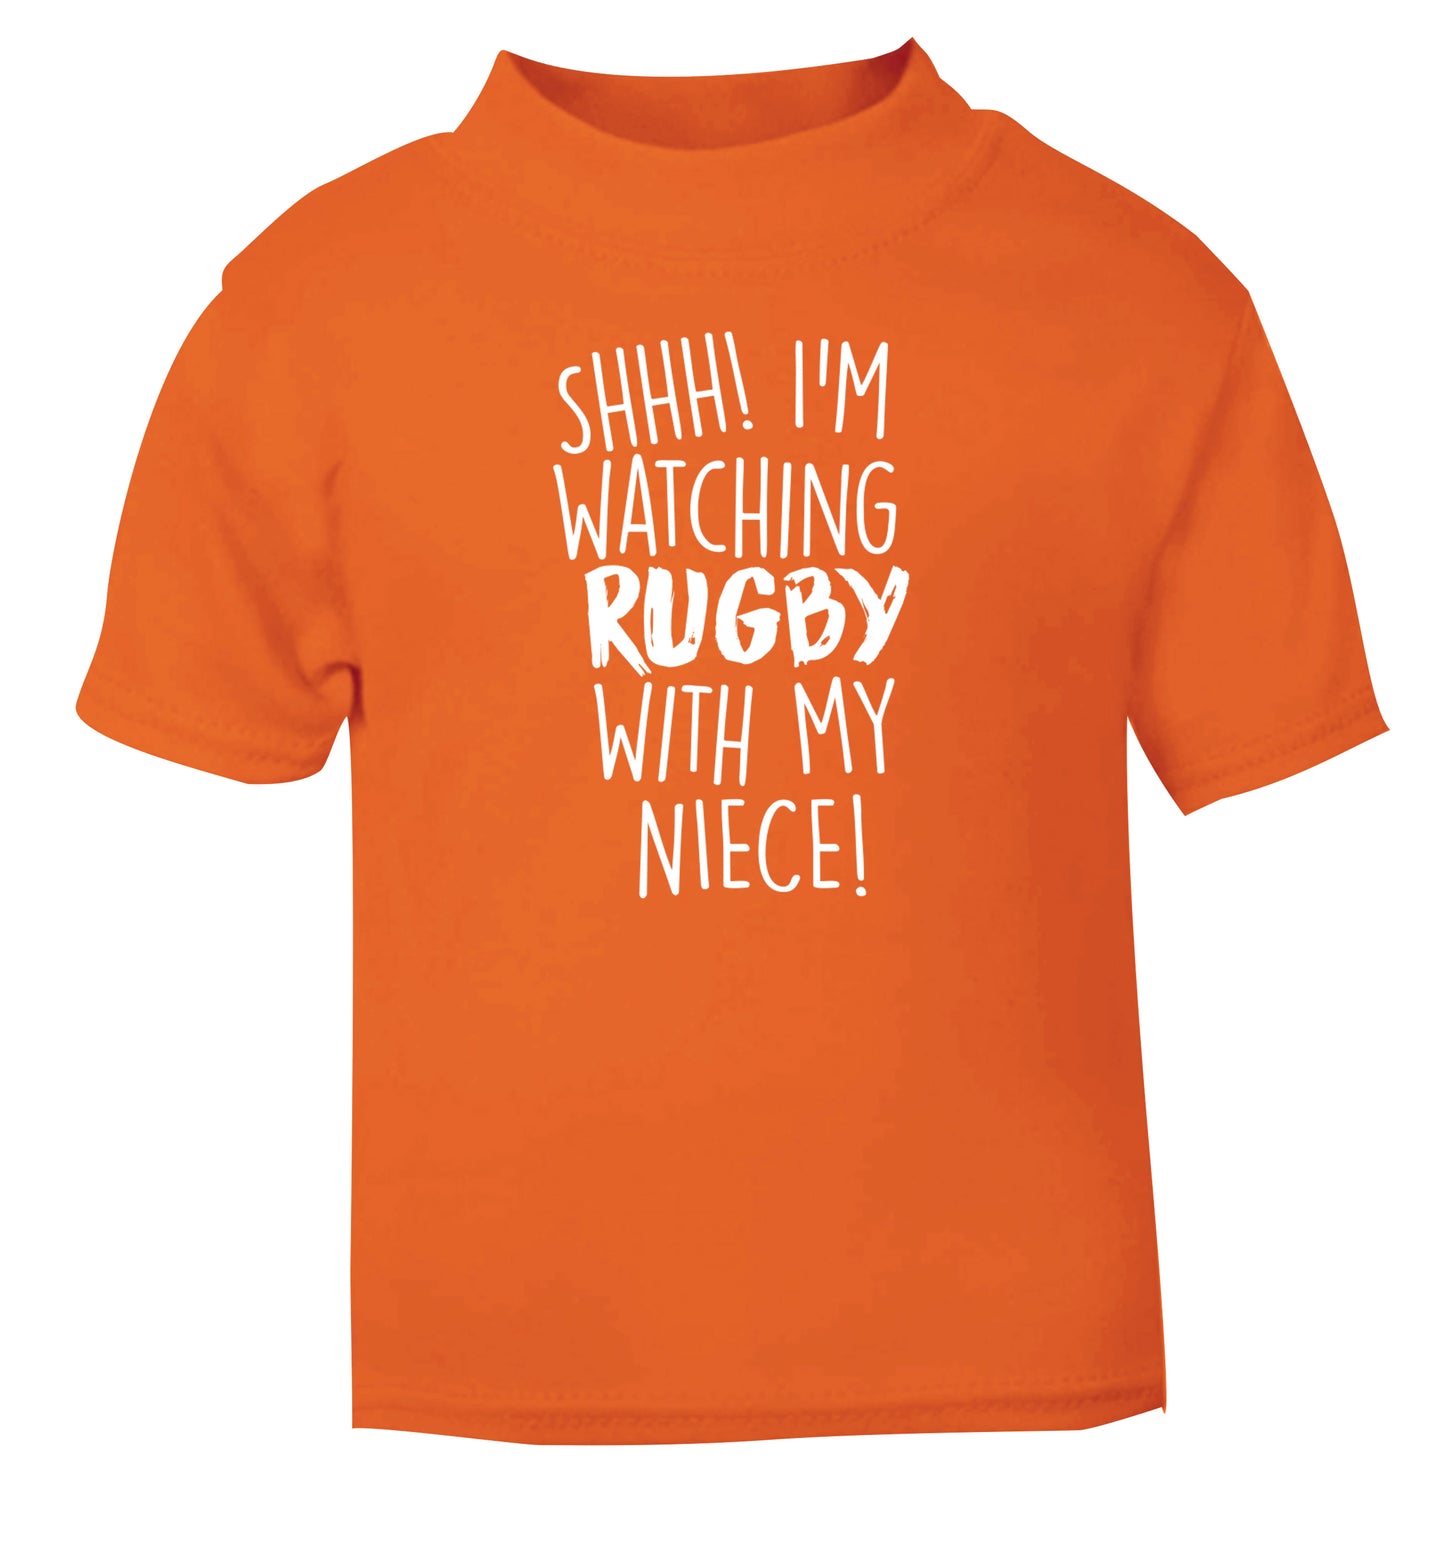 Shh.. I'm watching rugby with my niece orange Baby Toddler Tshirt 2 Years